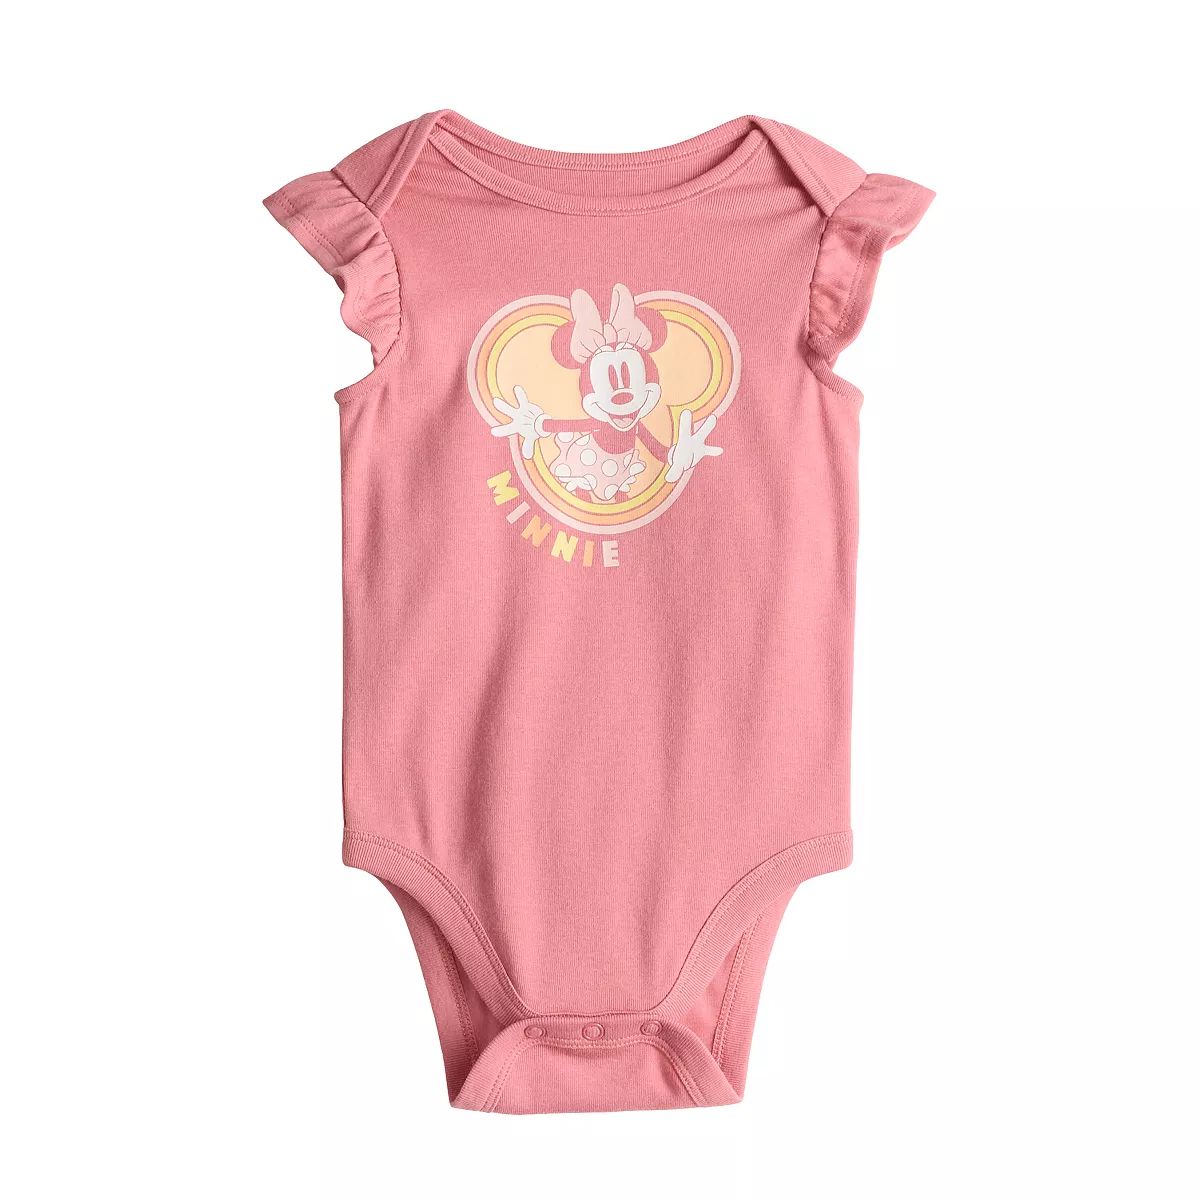 Disney's Minnie Mouse Baby Girl Ruffled Bodysuit by Jumping Beans® | Kohl's